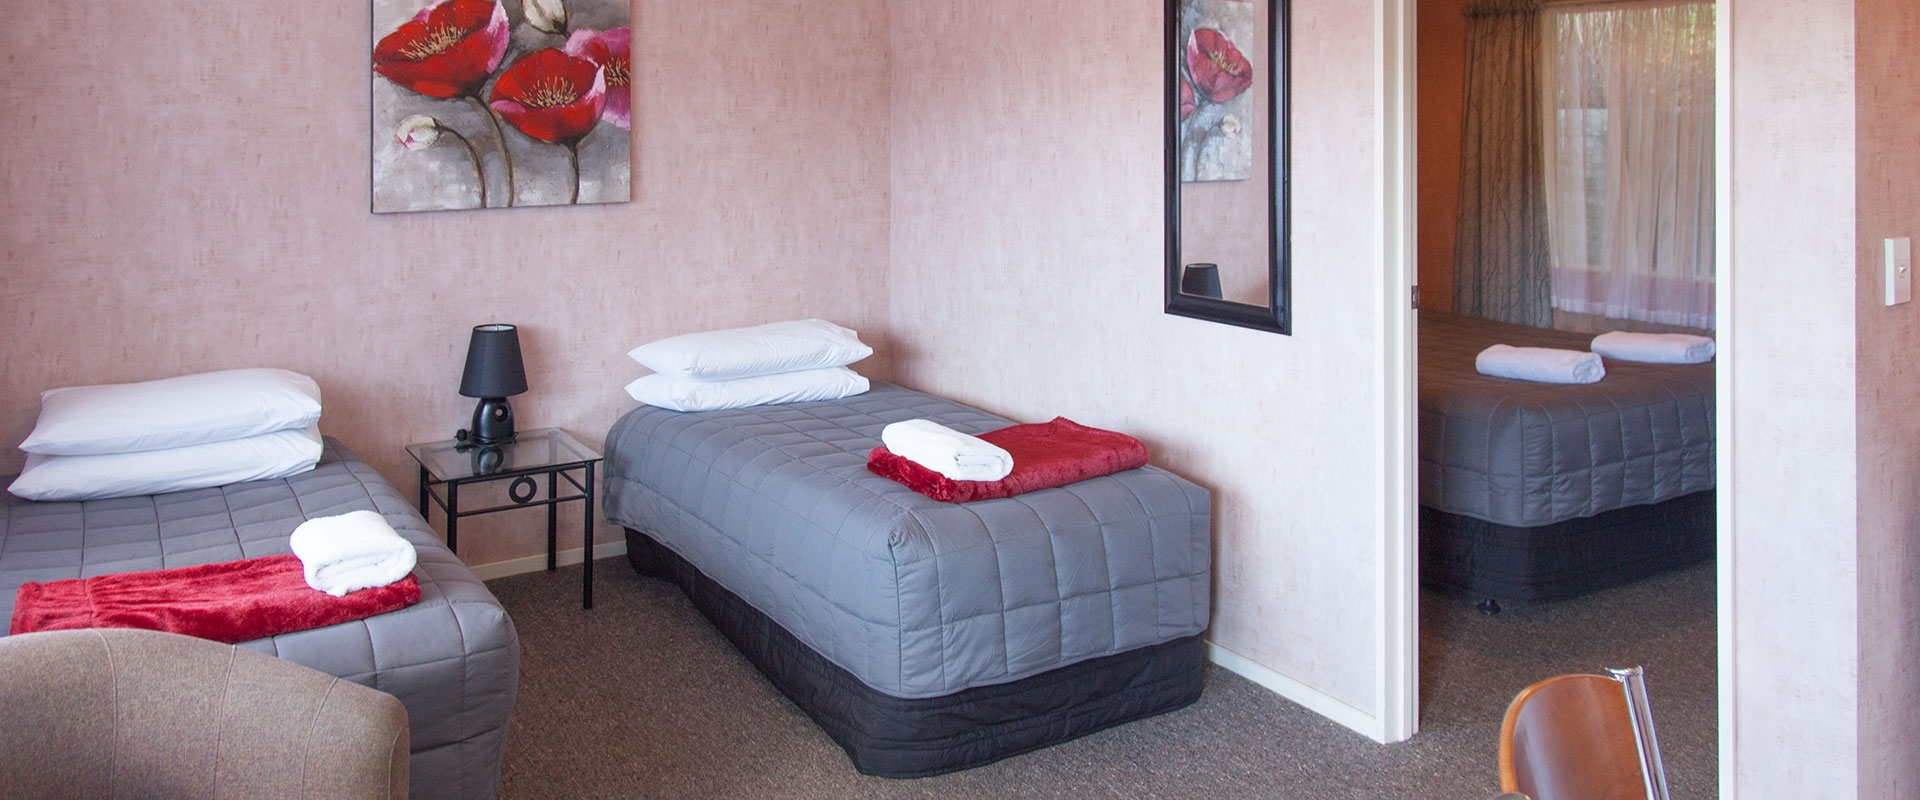 comfortable accommodation at affordable rates